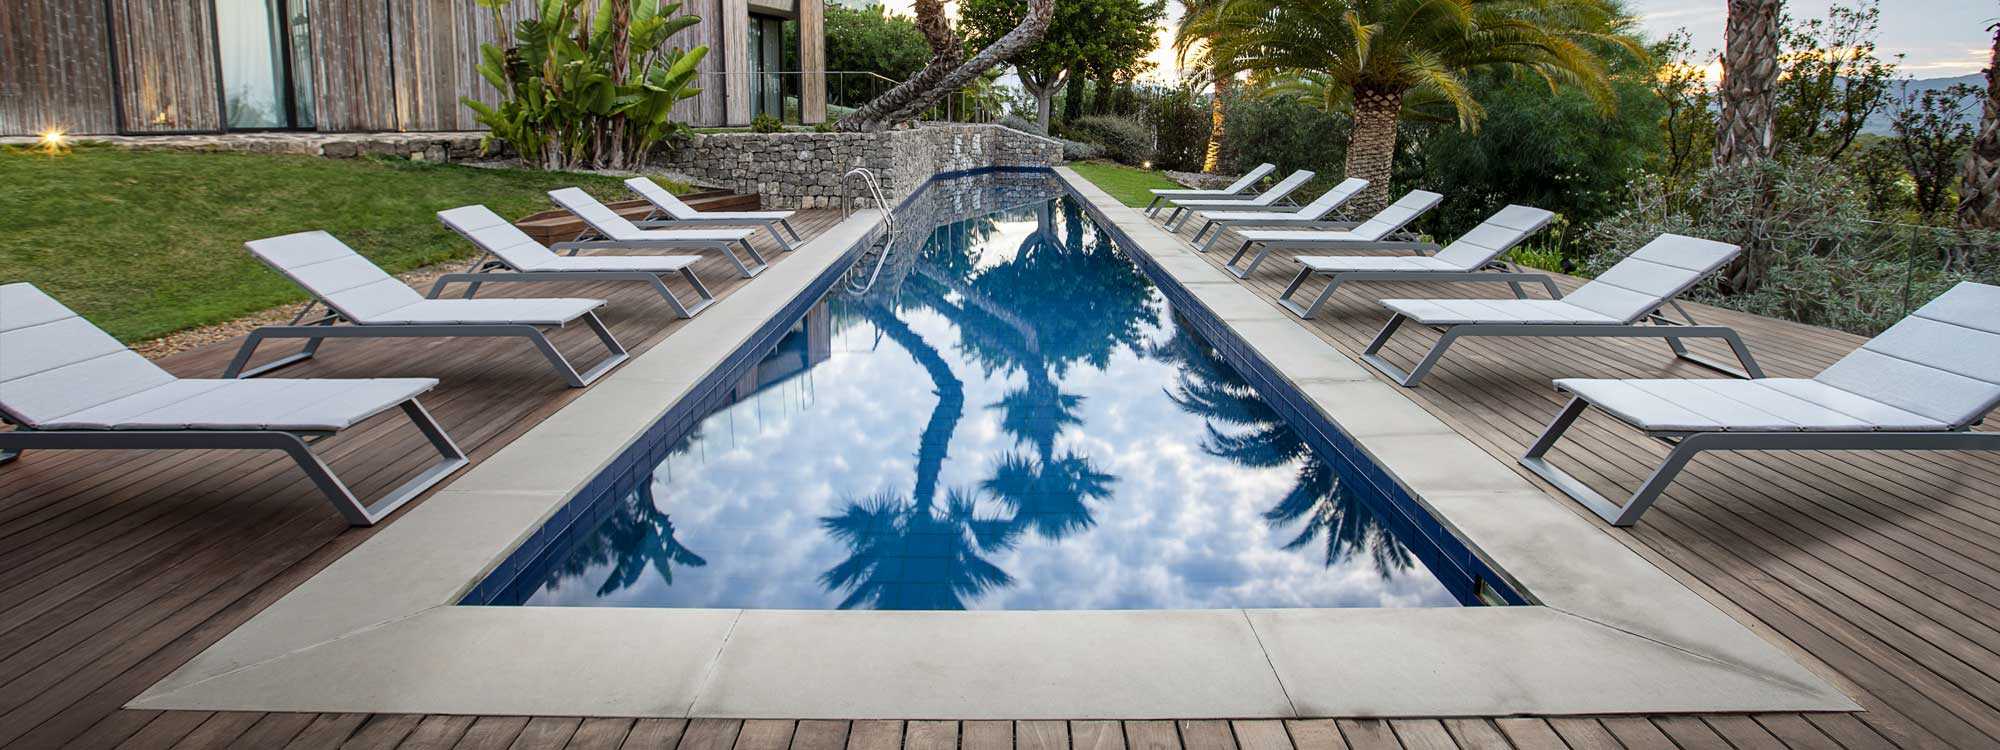 Striking image of Siesta sun loungers by Cane-line down either side of swimming pool at dusk